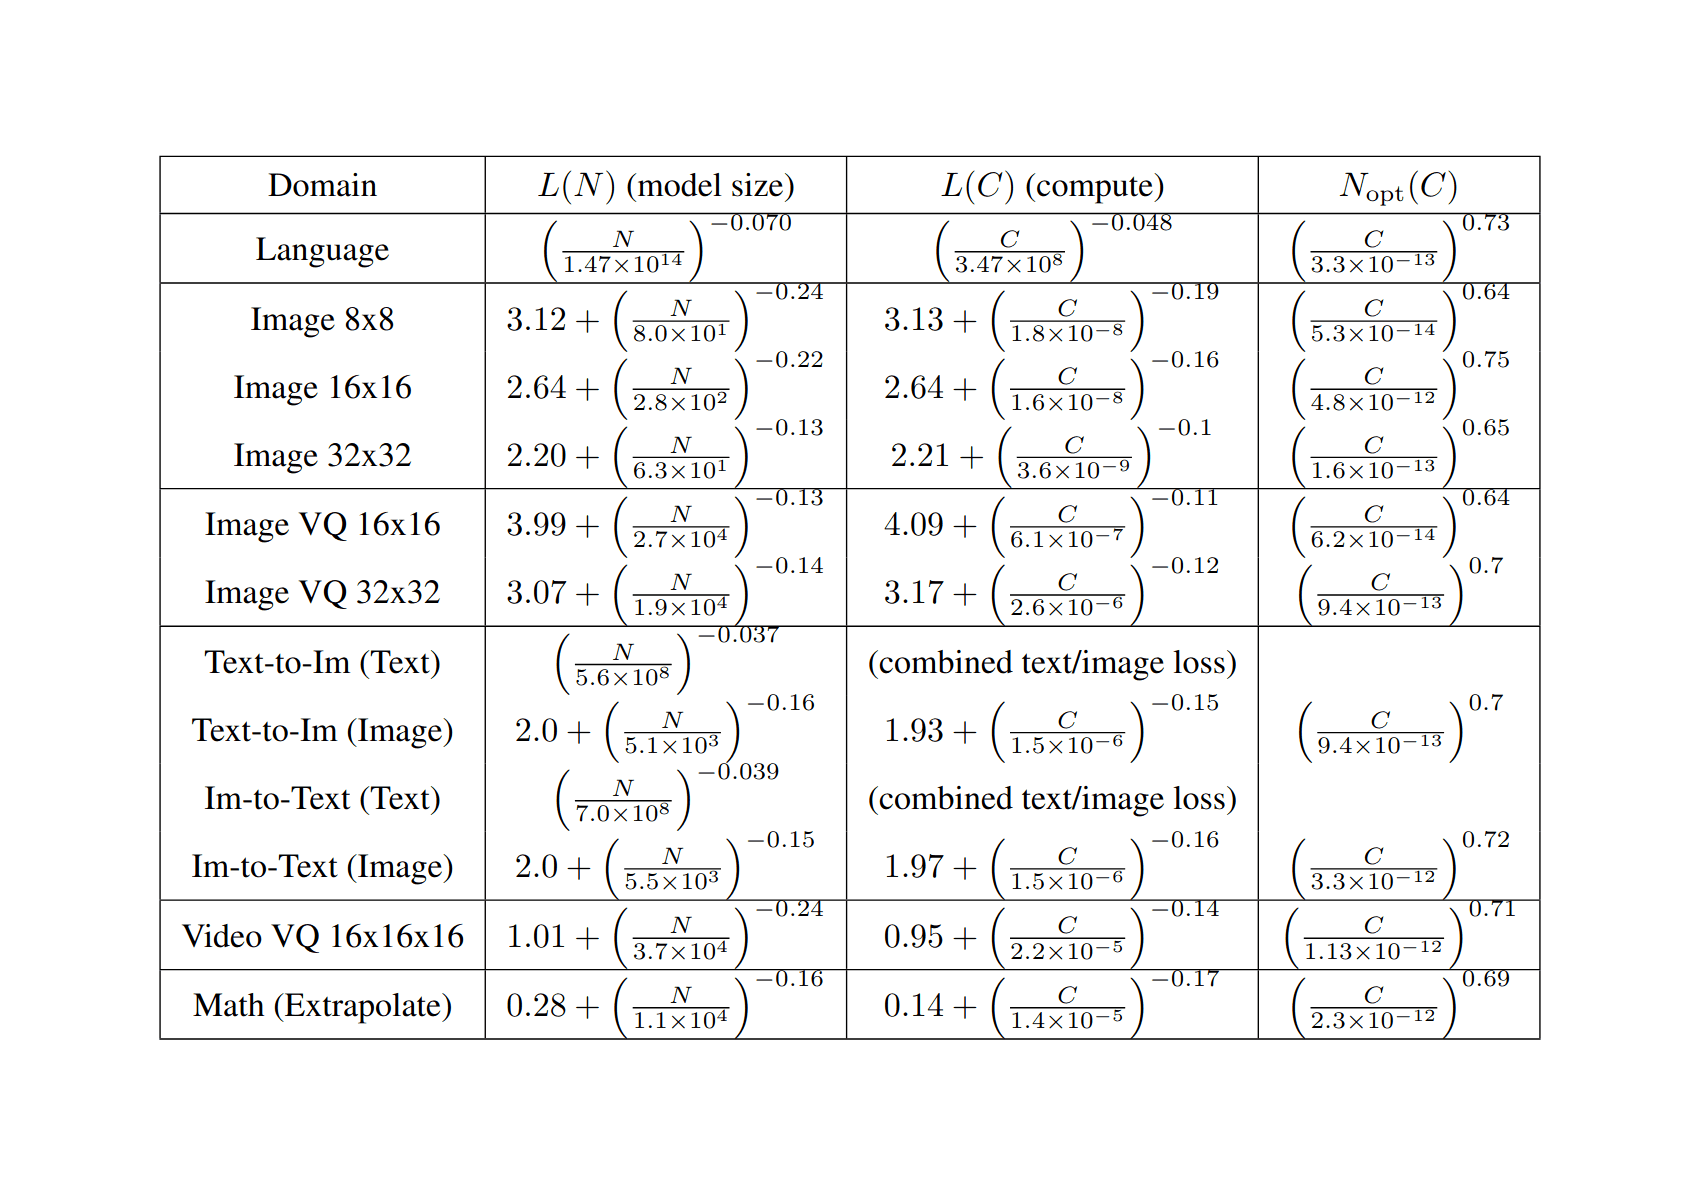 Table 1: Summary of scaling laws—In this table we summarize the model size and compute scaling fits to equation (1.1) along with Nopt(C), with the loss in nats/​token, and compute measured in petaflop-days. In most cases the irreducible losses match quite well between model size and compute scaling laws. The math compute scaling law may be affected by the use of weight decay, which typically hurts performance early in training and improves performance late in training. The compute scaling results and data for language are from [BMR+20], while Nopt(C)comes from [KMH+20]. Unfortunately, even with data from the largest language models we cannot yet obtain a meaningful estimate for the entropy of natural language. [This is an updated scaling power law summary from Henighan et al 2020.]